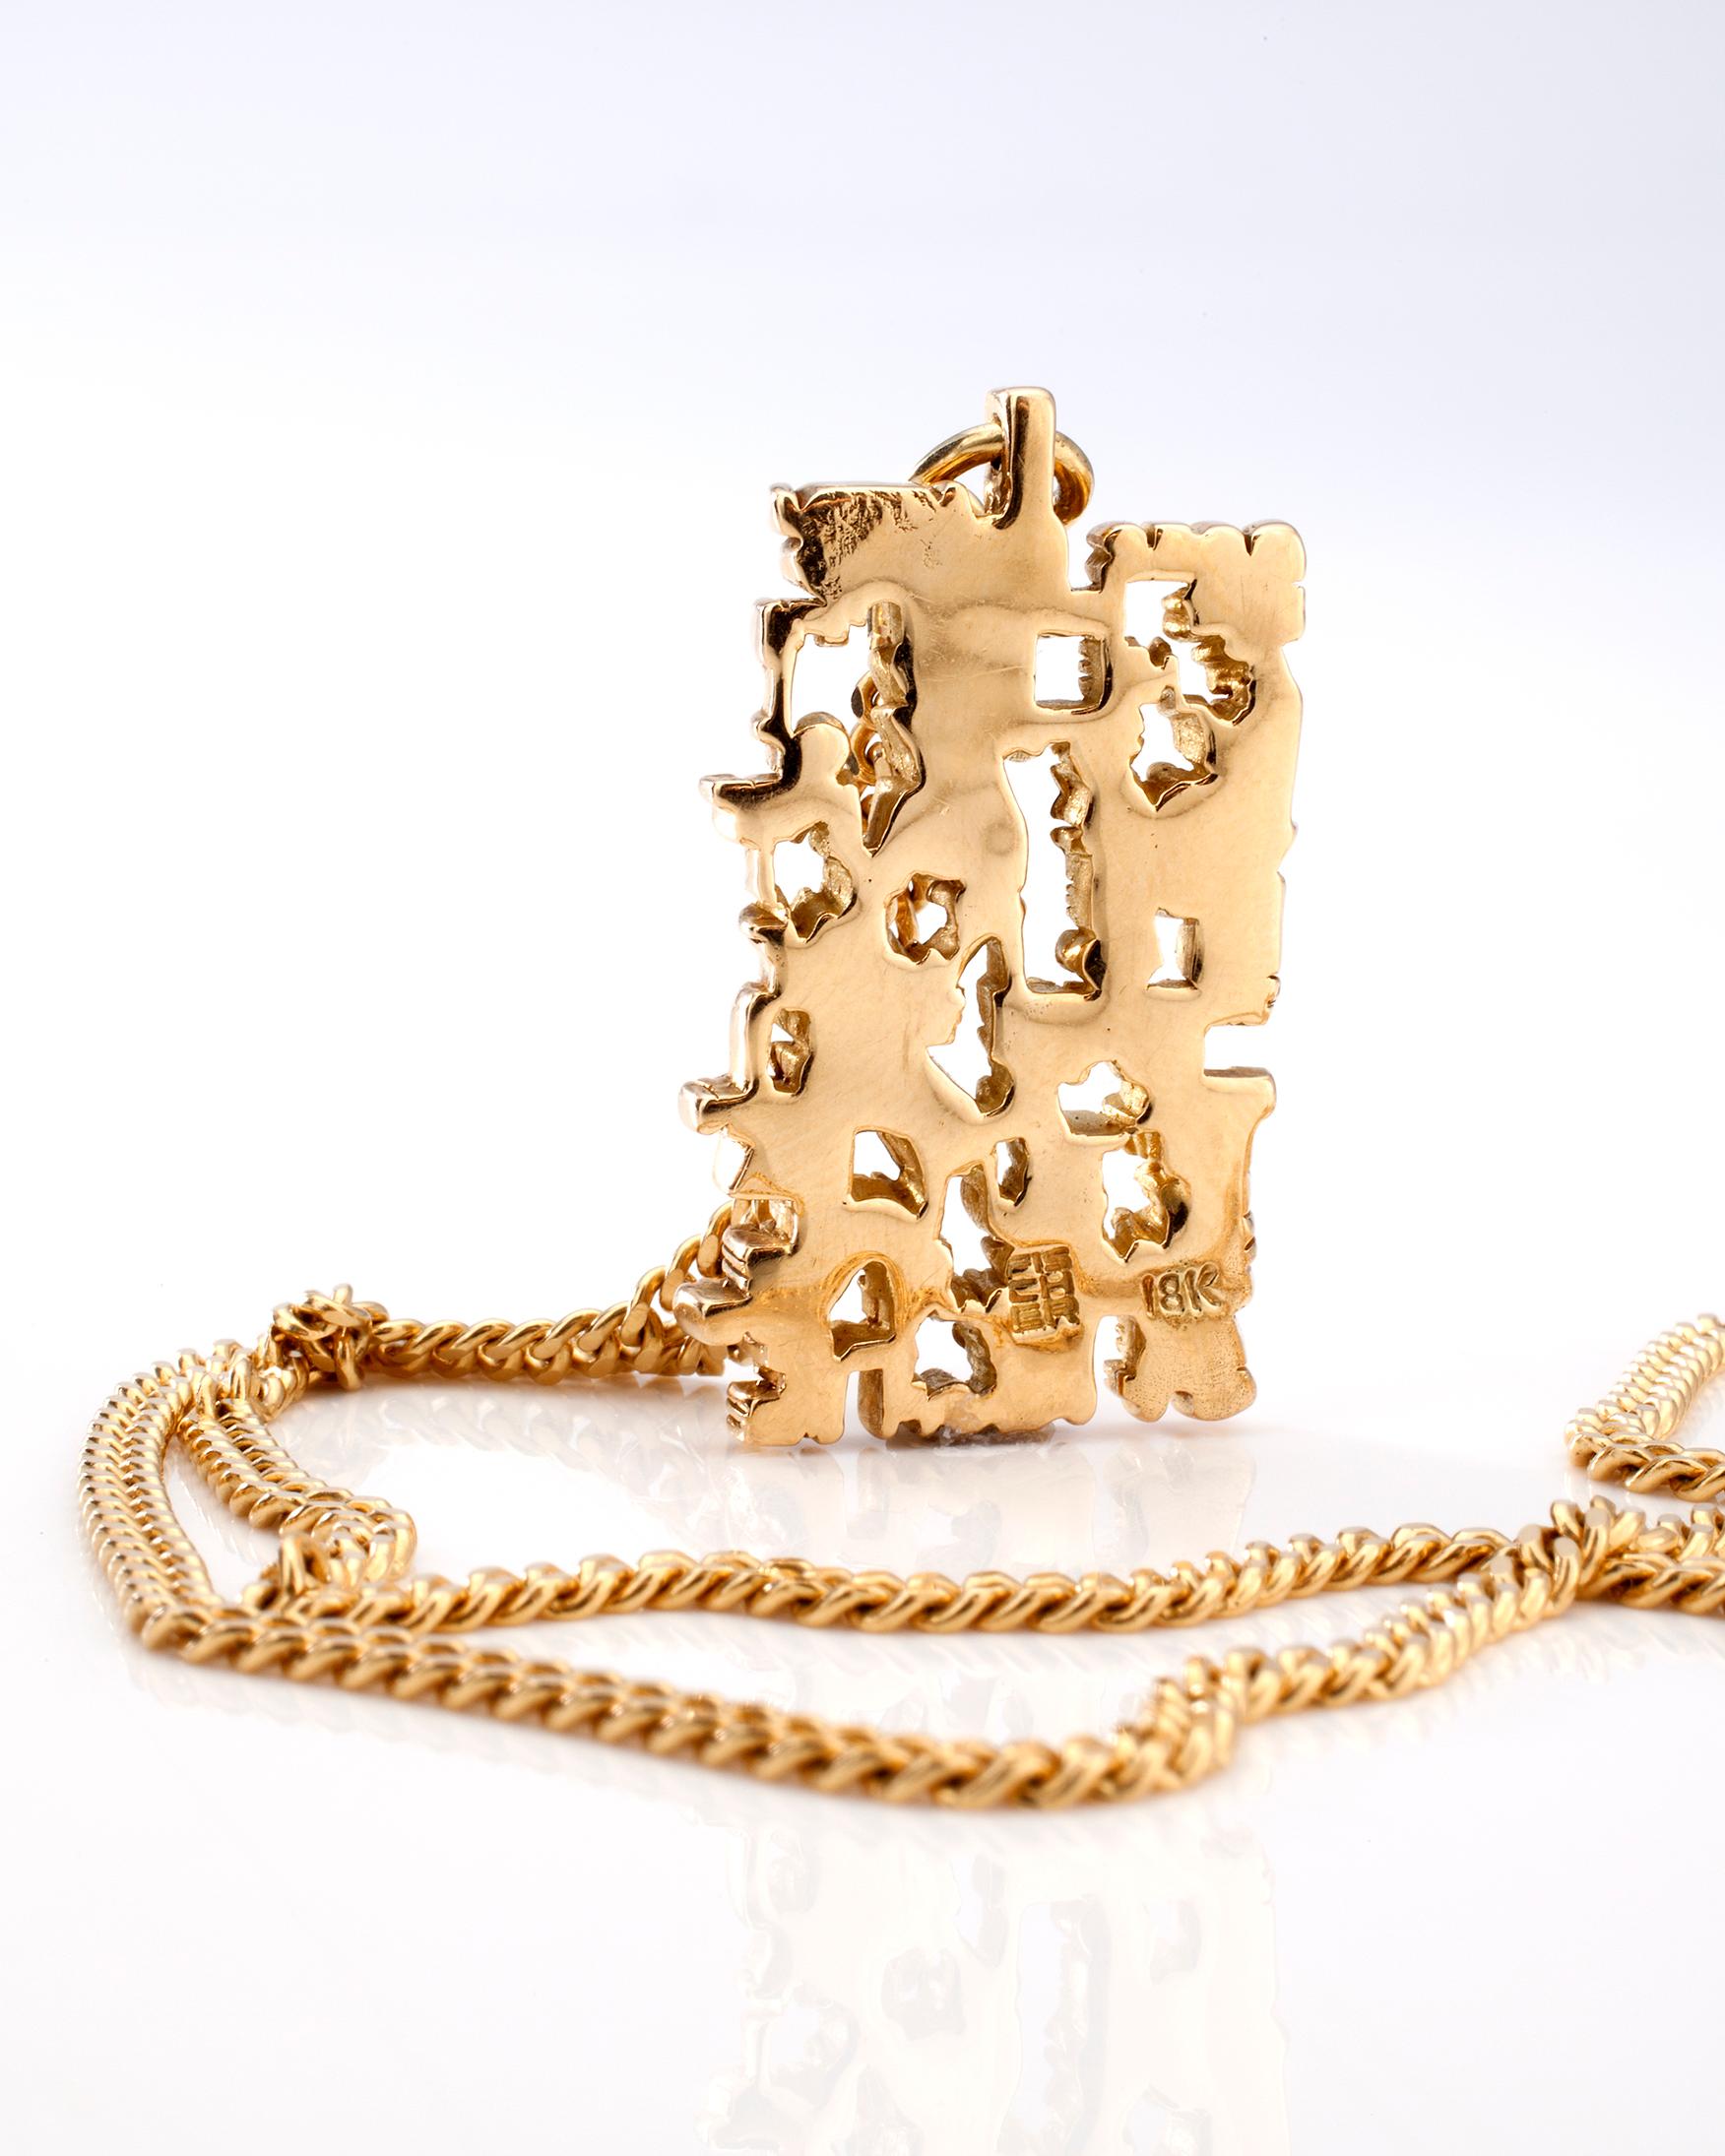 Fragment from Hell-V, in 18k gold. From the 